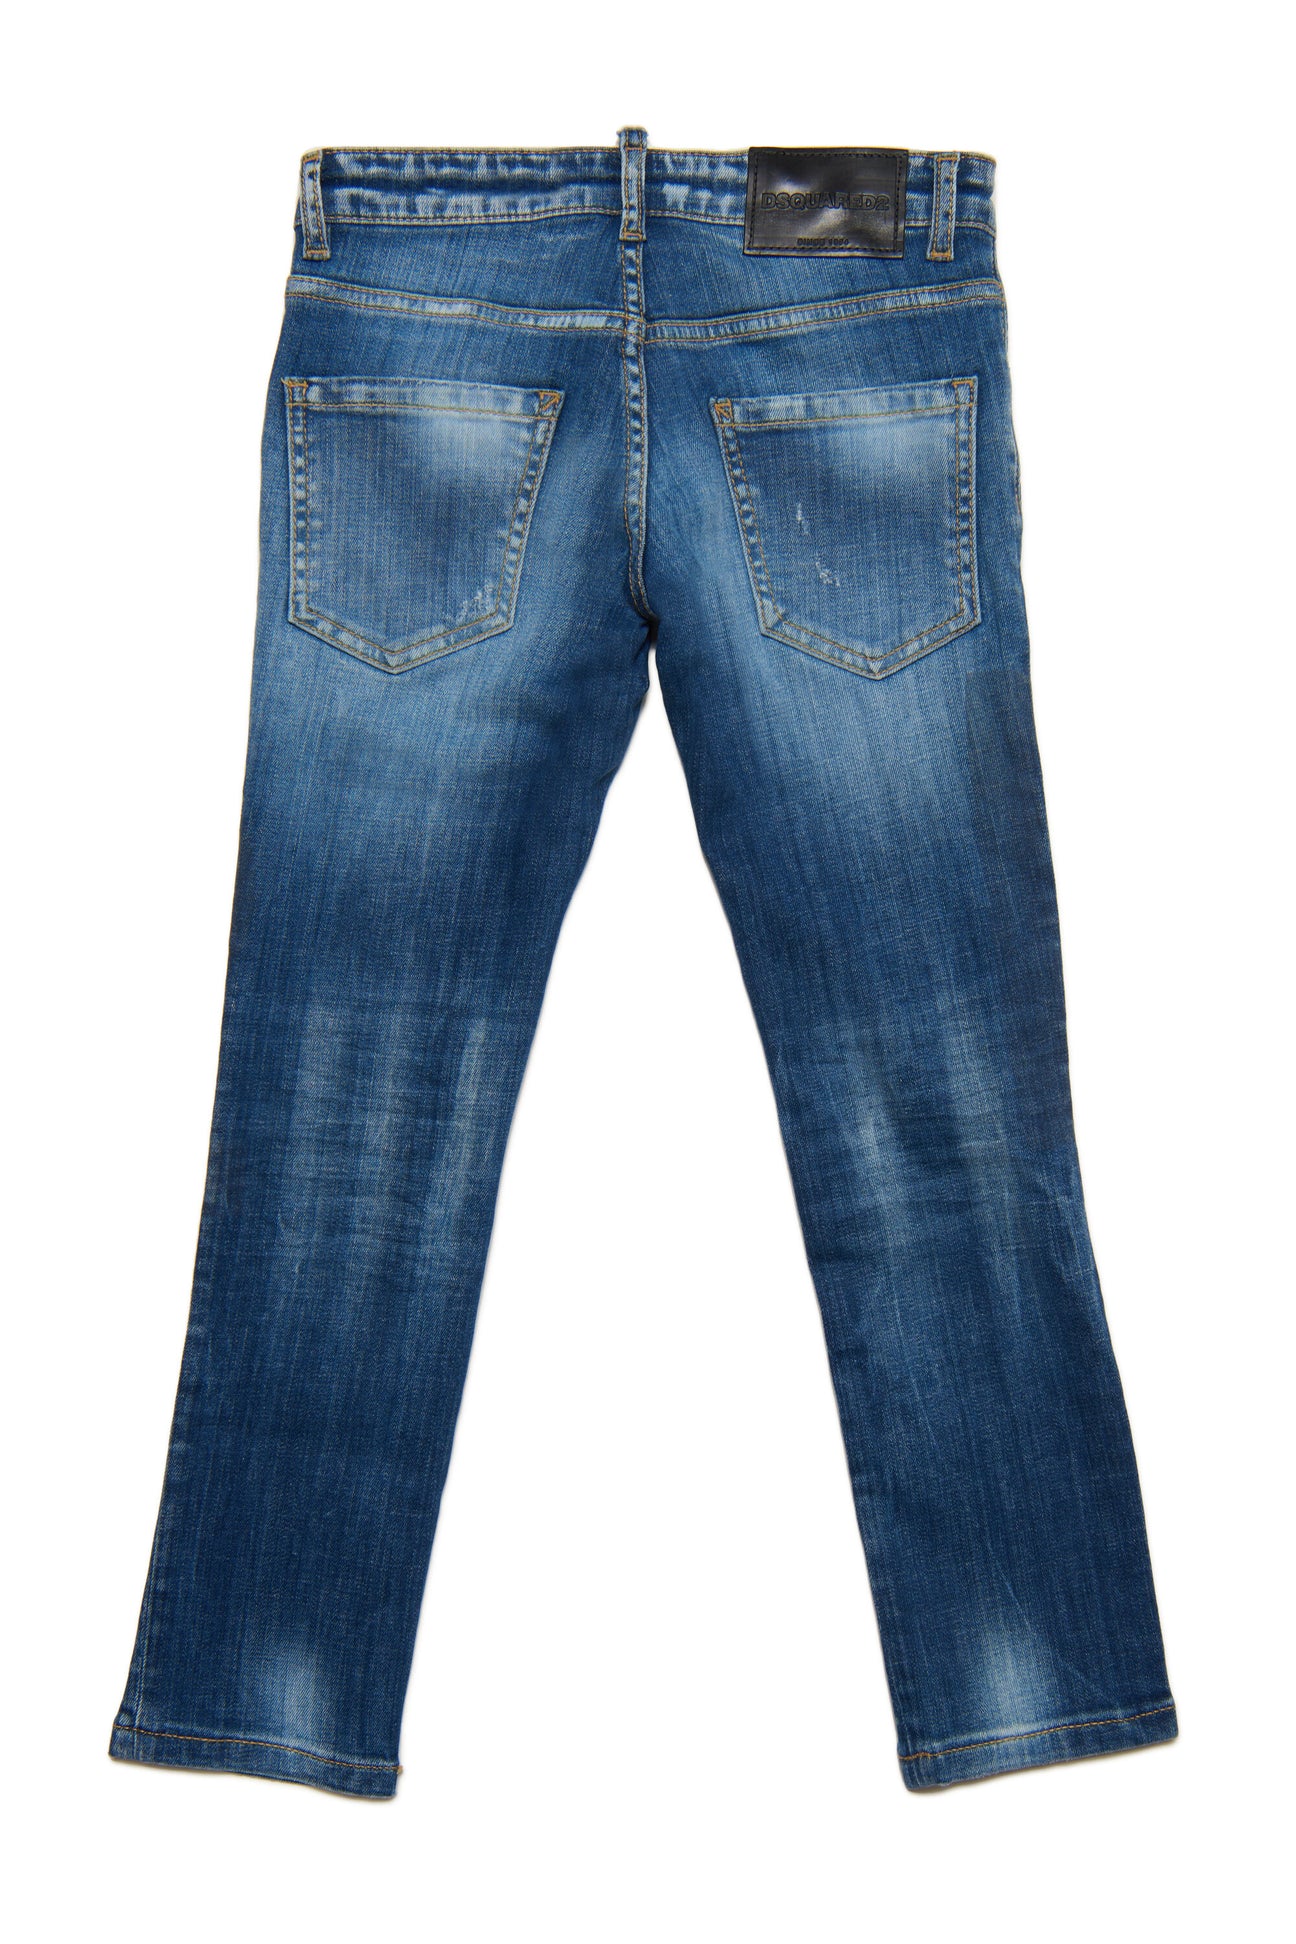 Clement jeans straight medium blue shaded with abrasions Clement jeans straight medium blue shaded with abrasions